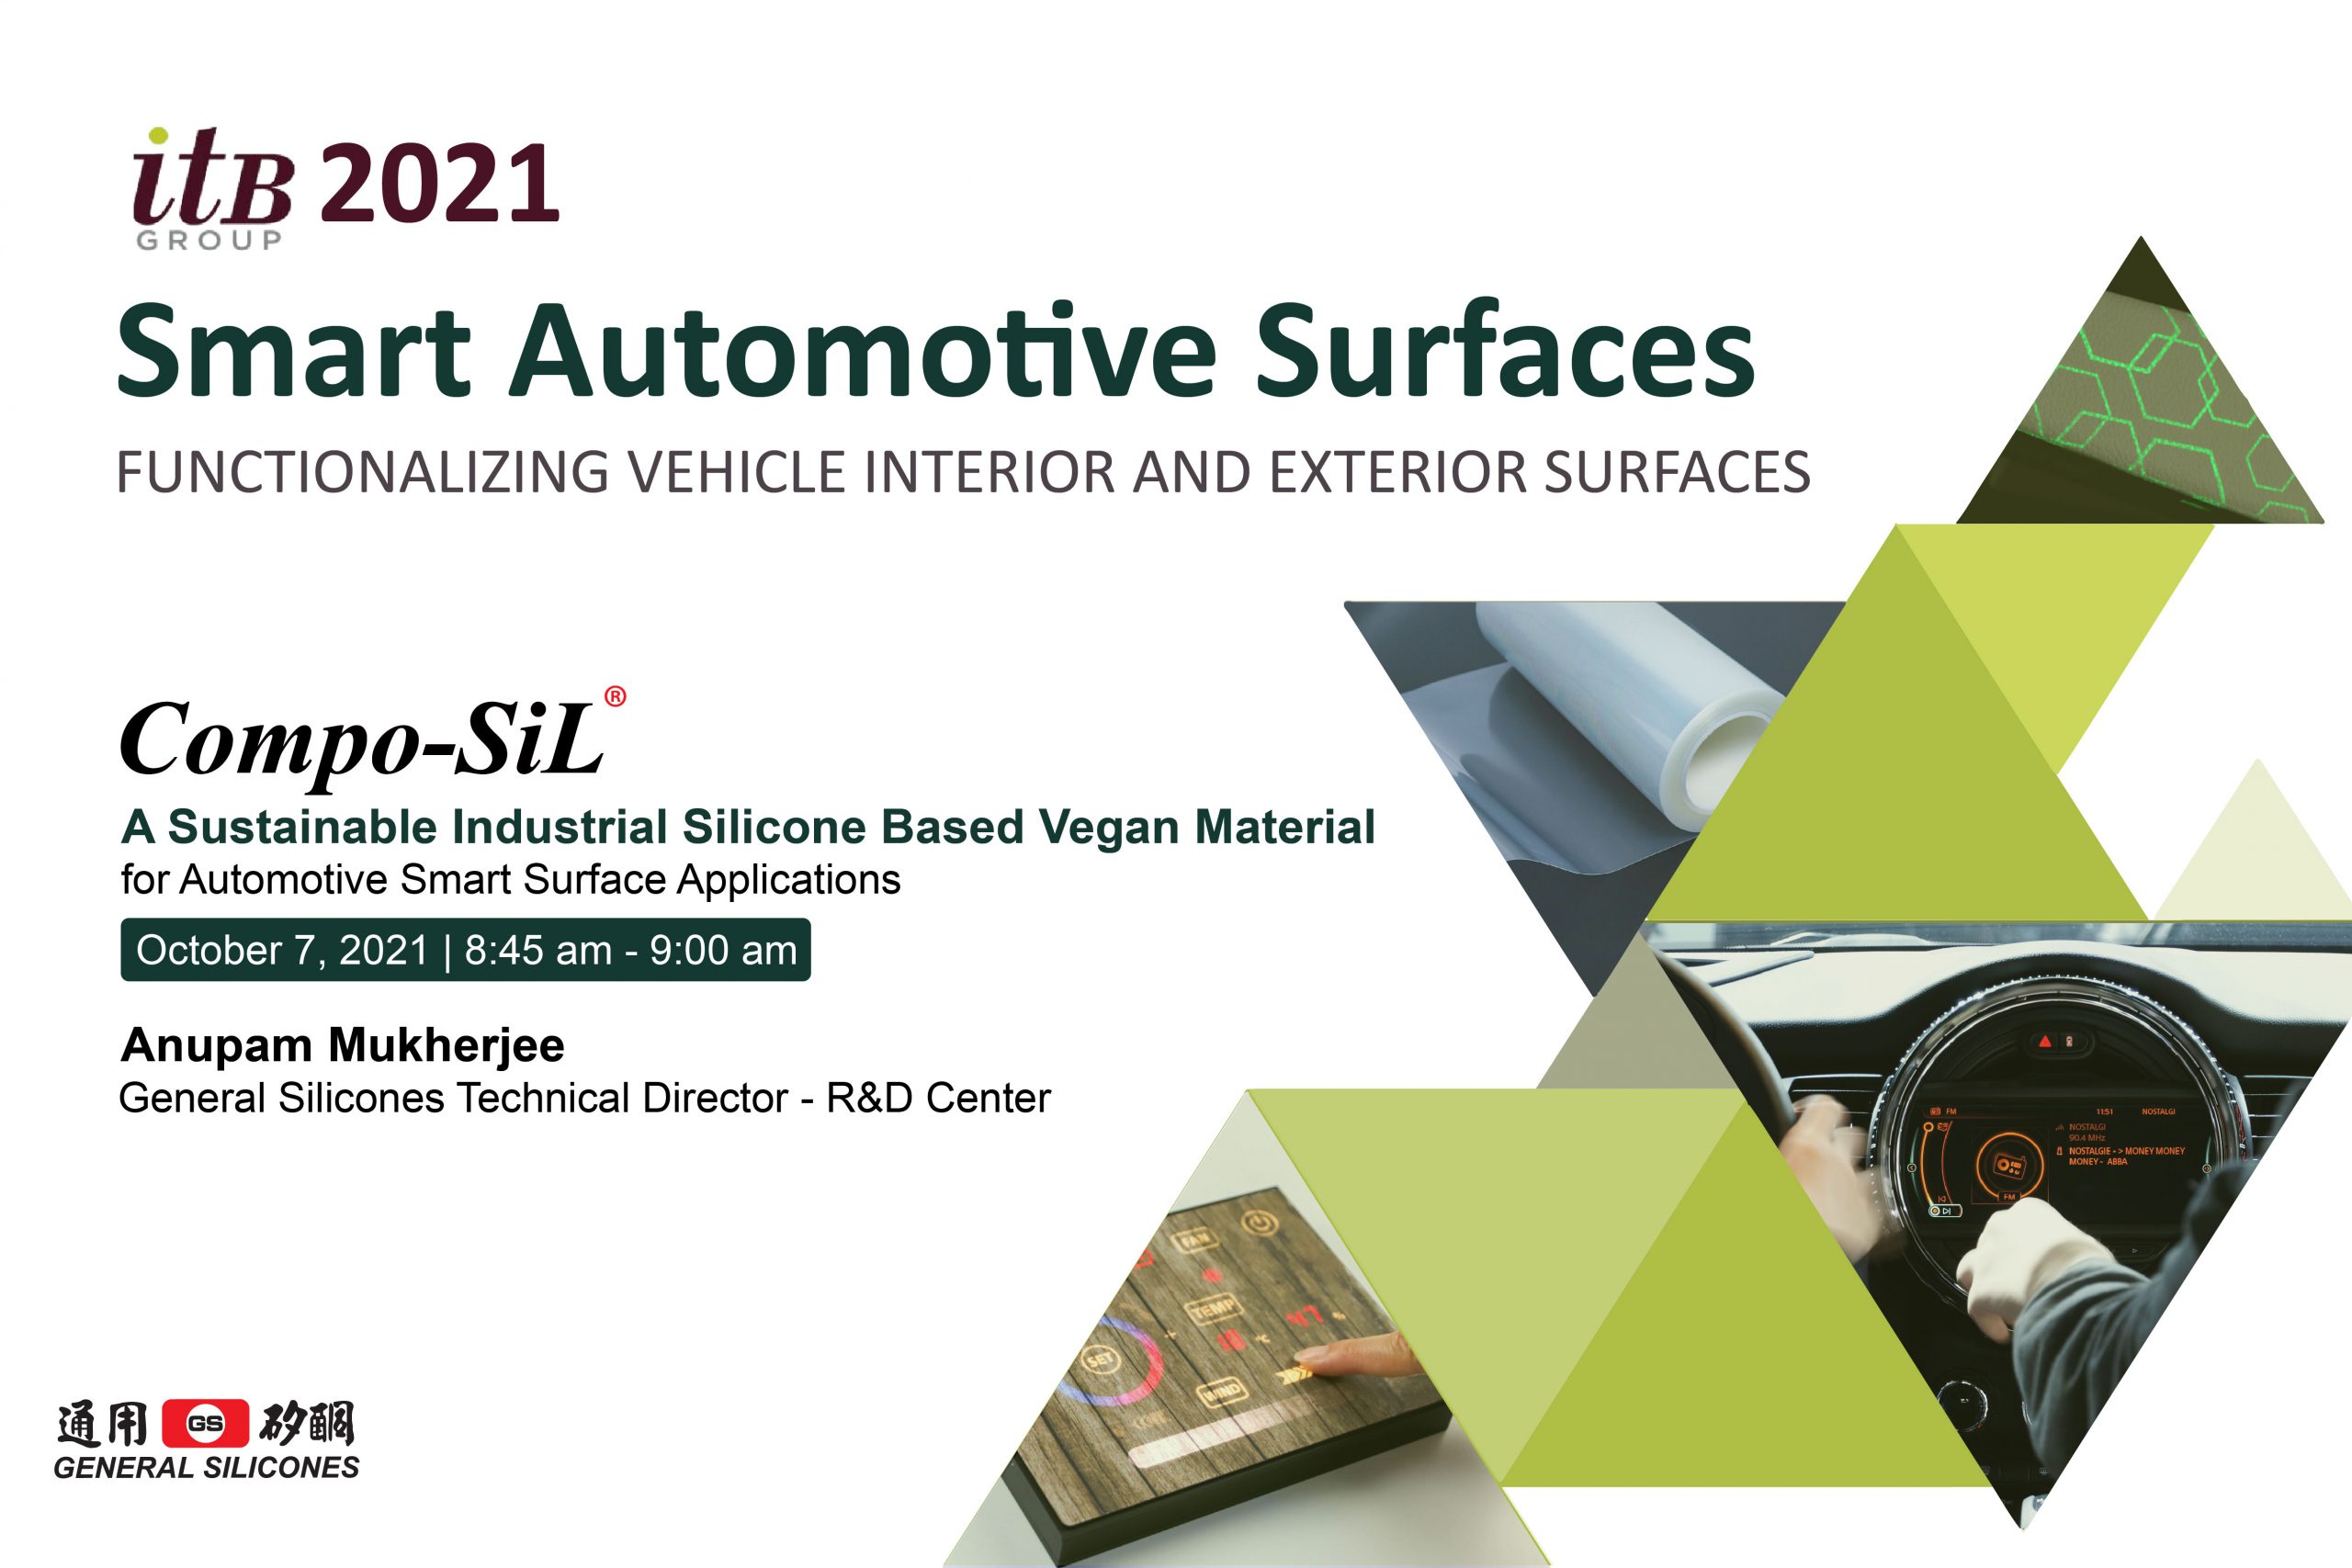 GS to Speak on Vegan Interior Materials for Cars at Smart Automotive Surfaces 2021